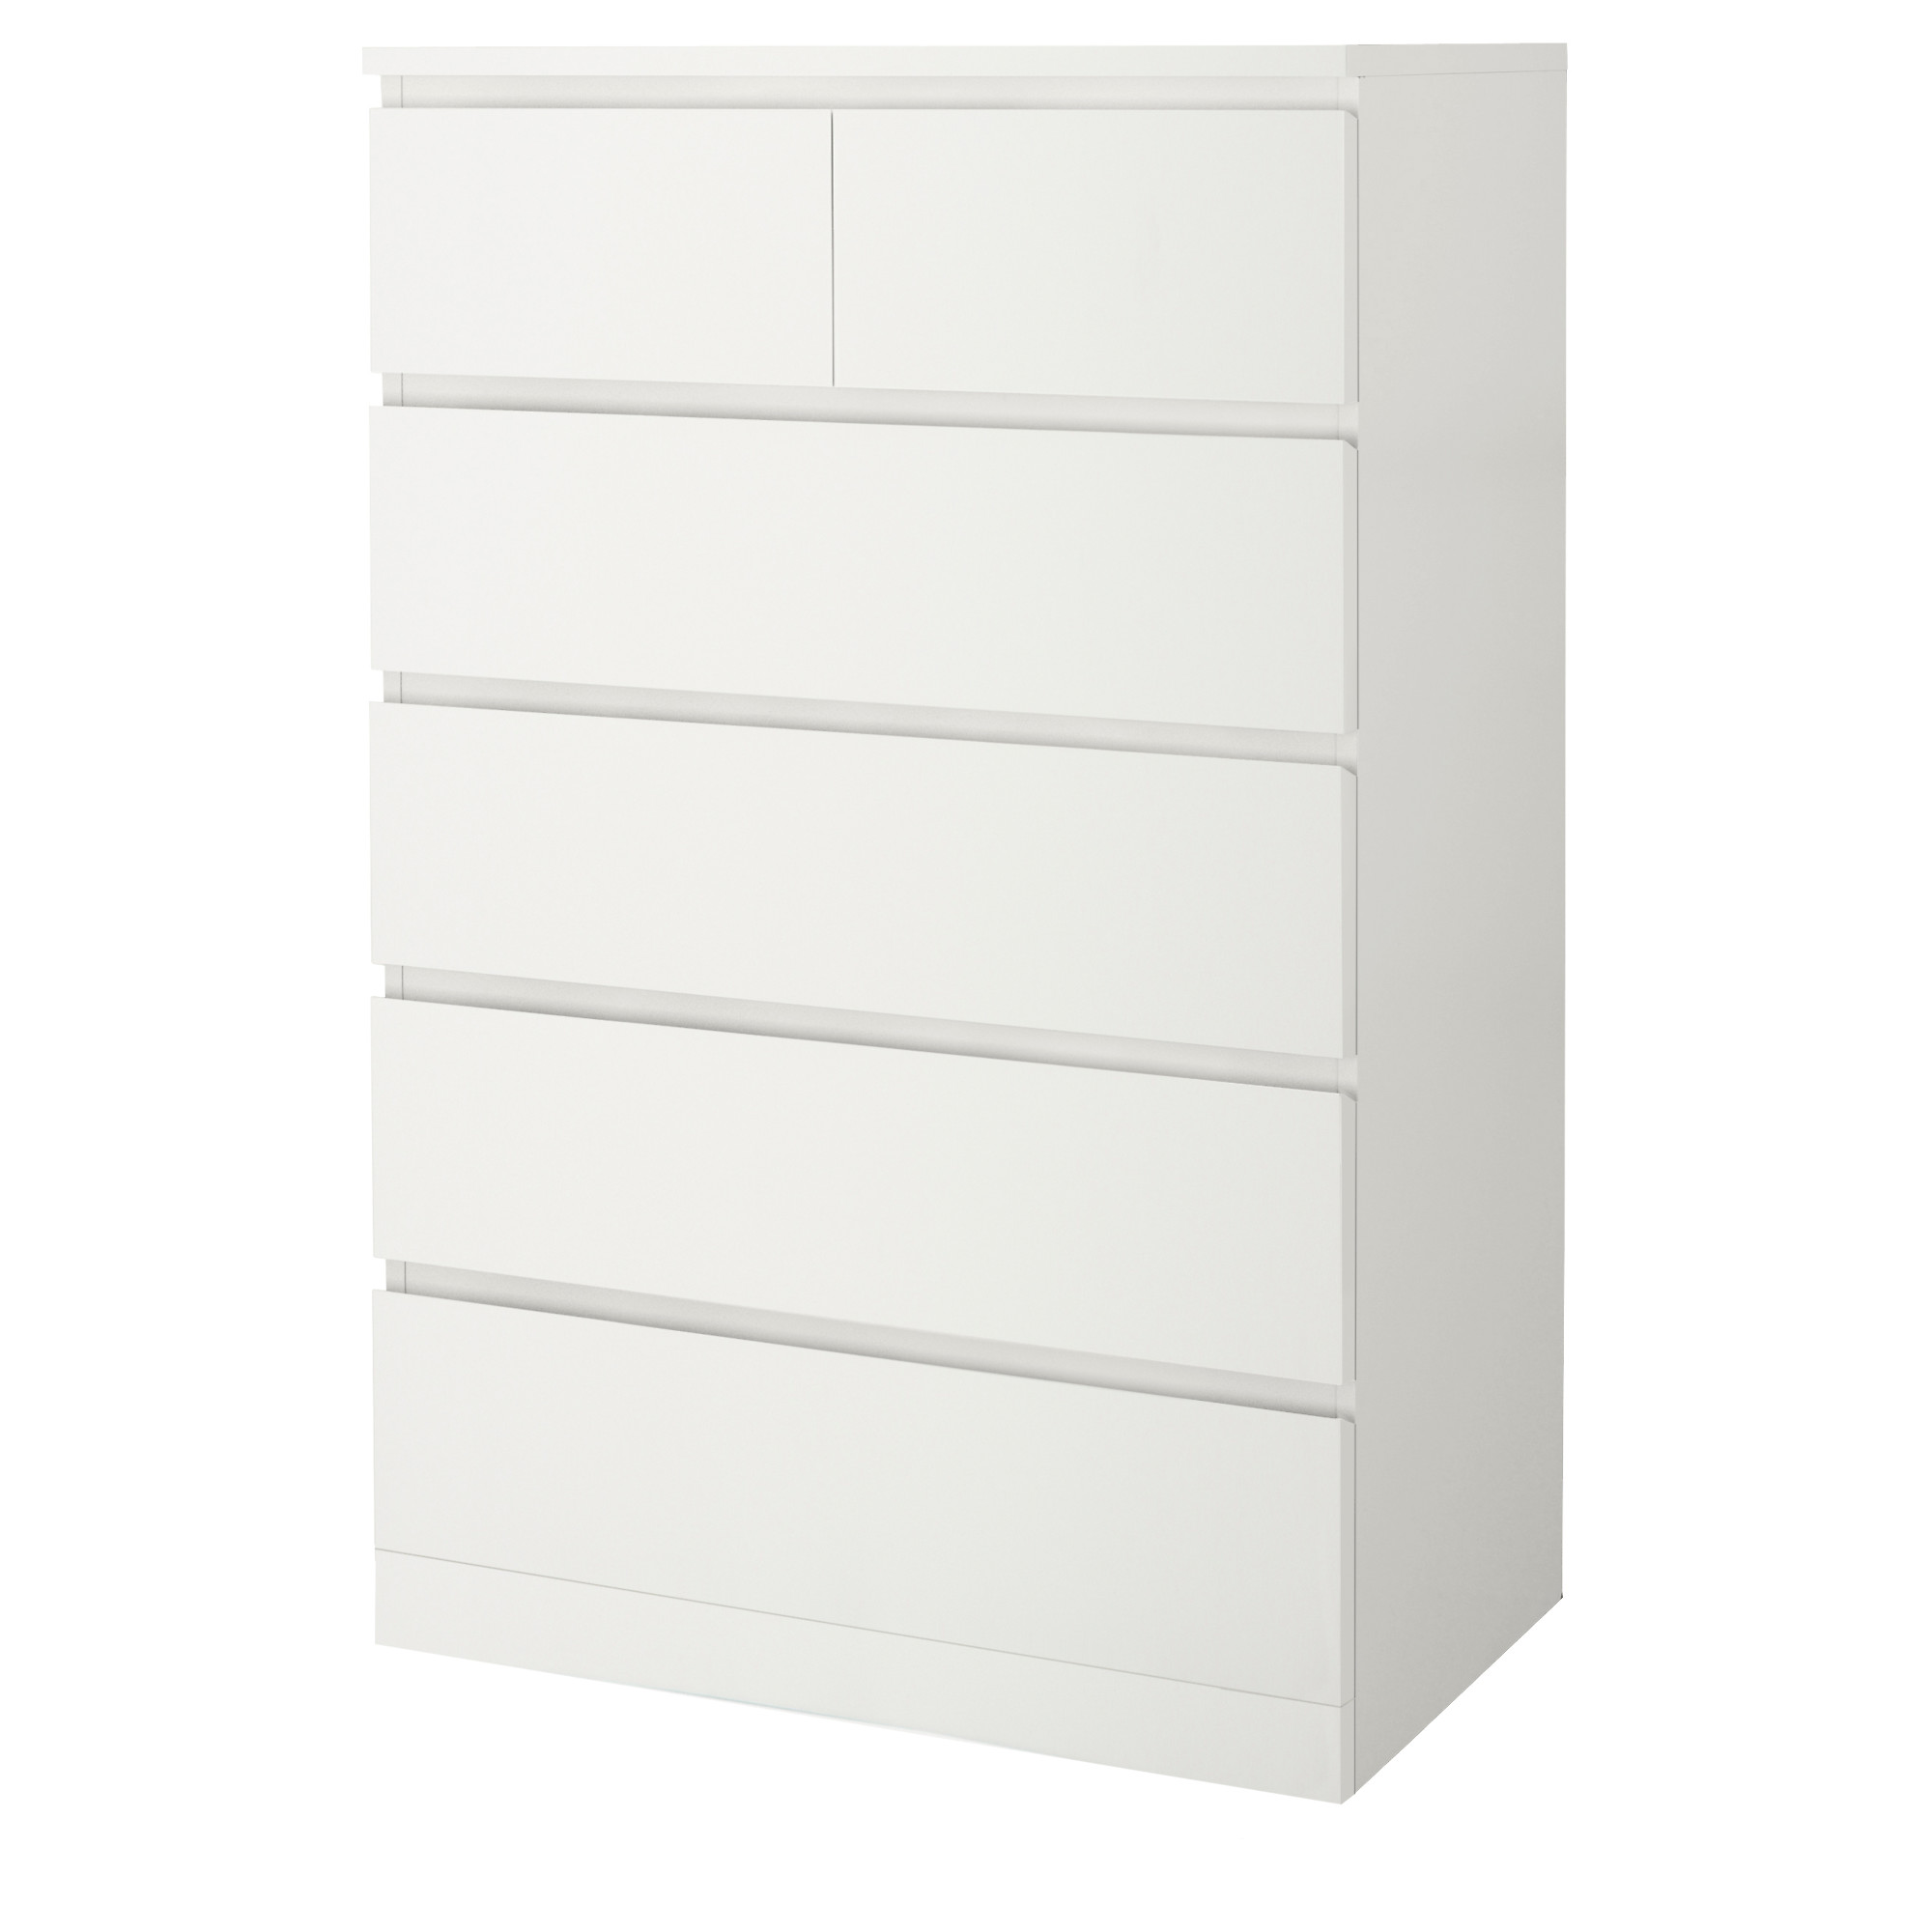 Malm Chest Of 6 Drawers White Ikea Hong Kong